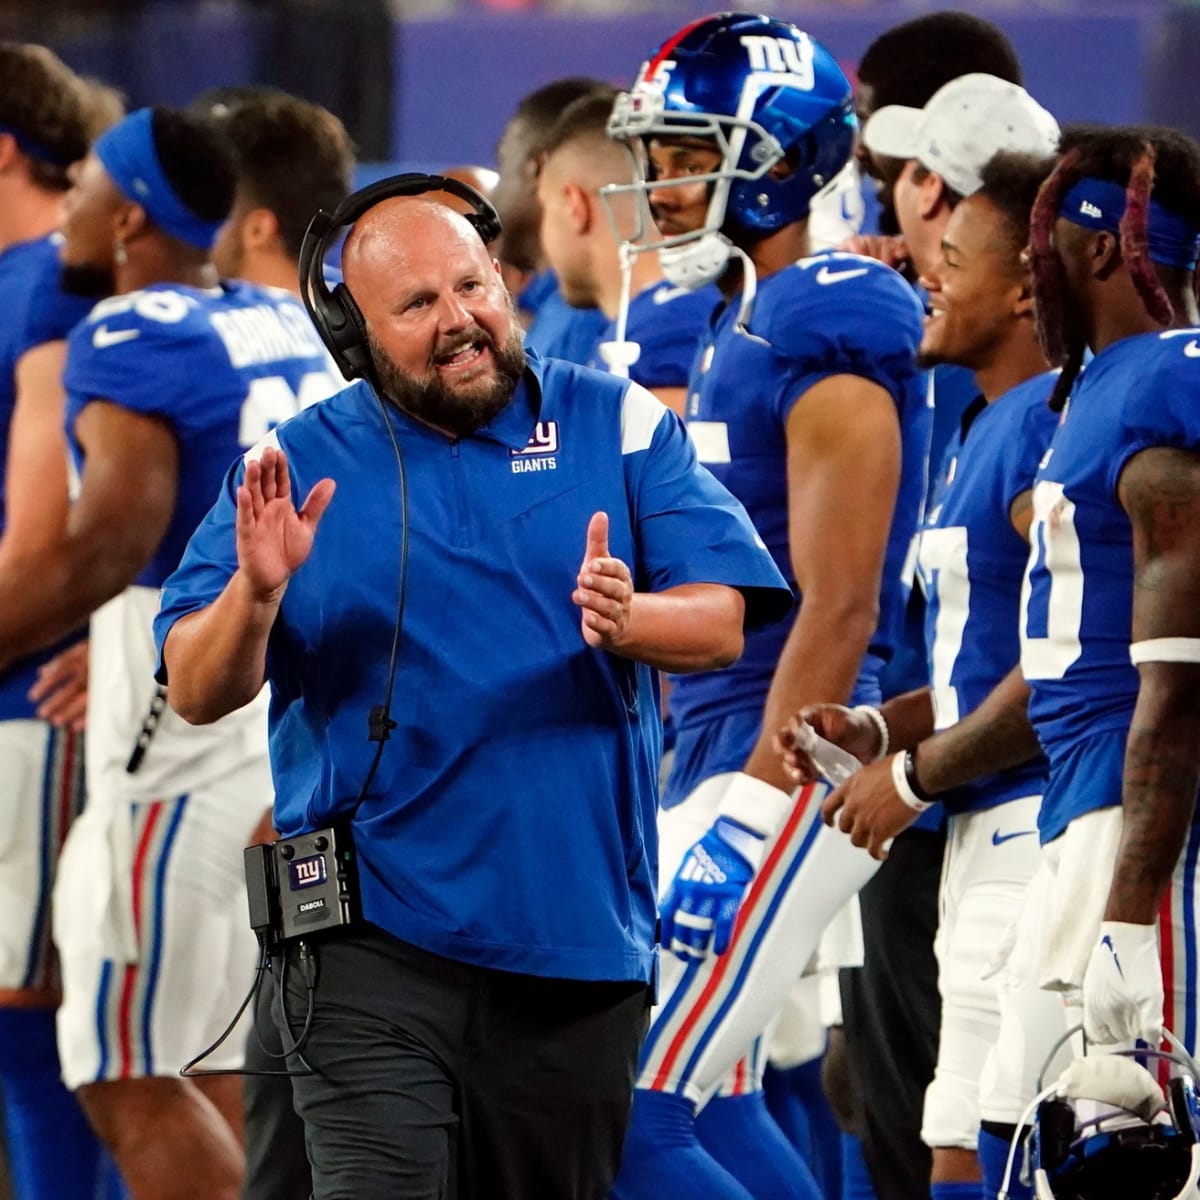 New York Giants Over/Under Total Wins Set; Will They Exceed It